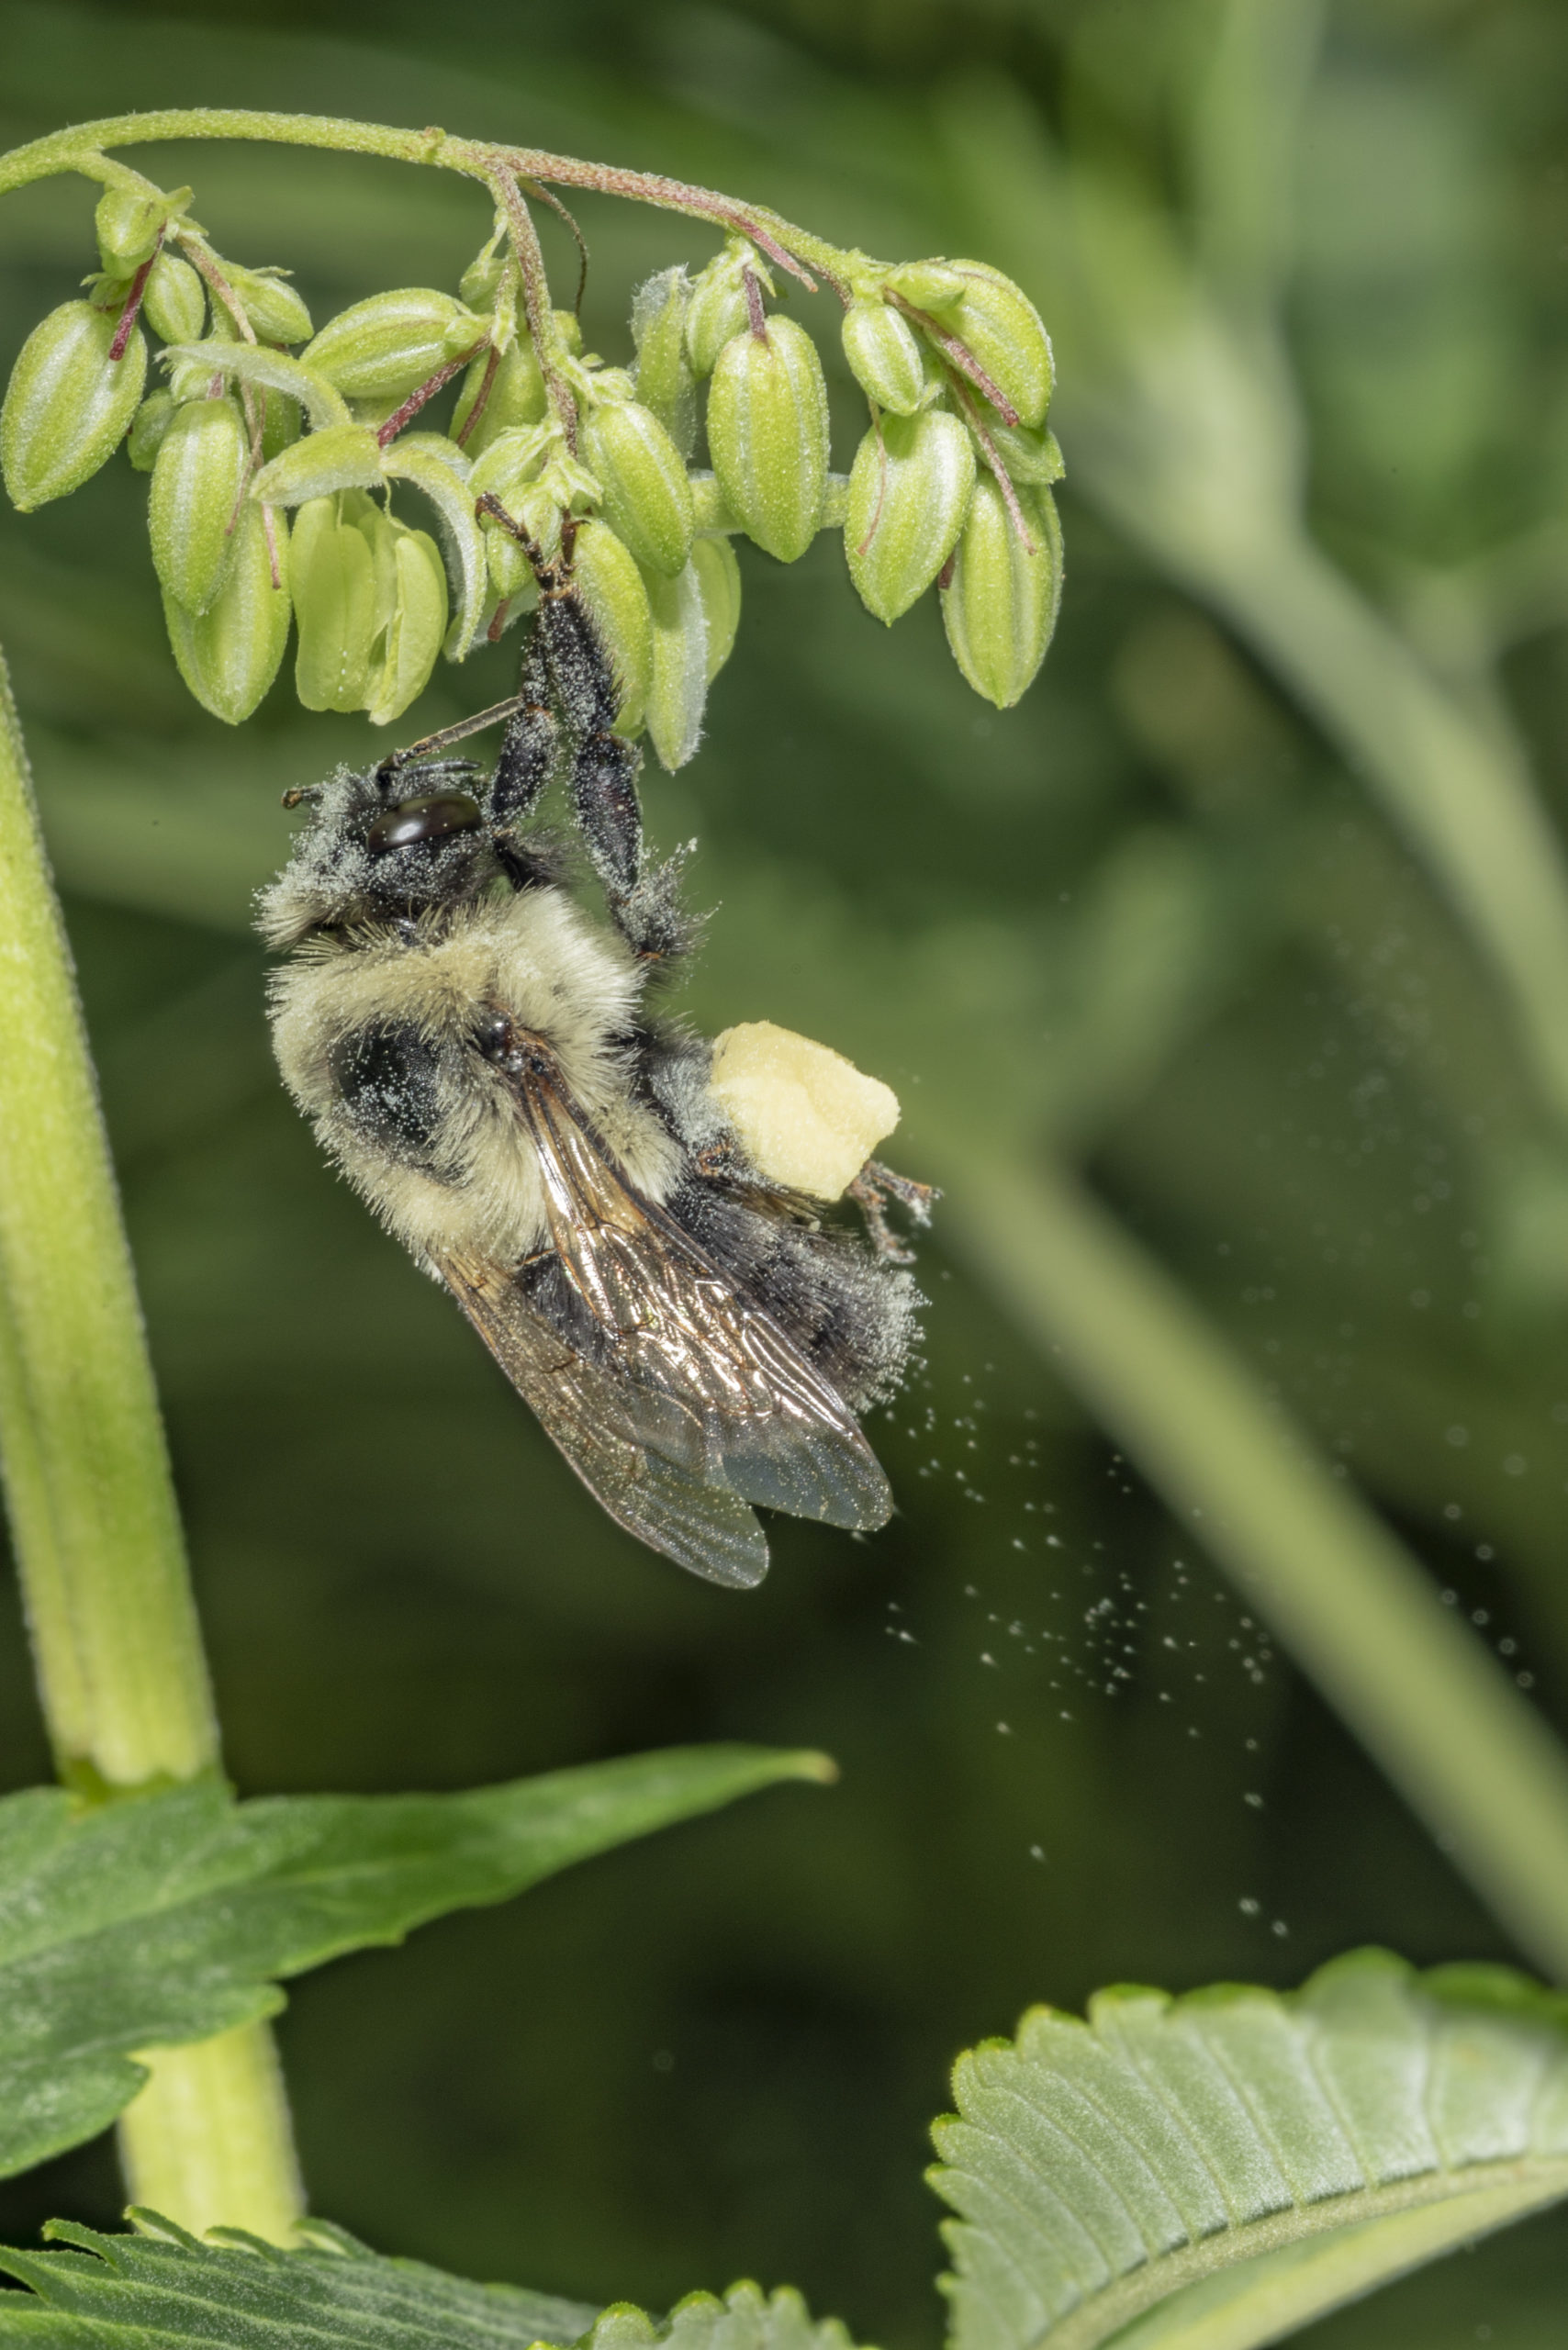 Image of a black and yellow bumble bee collecting pollen from a hemp plant. It's legs and body are covered in pollen. 